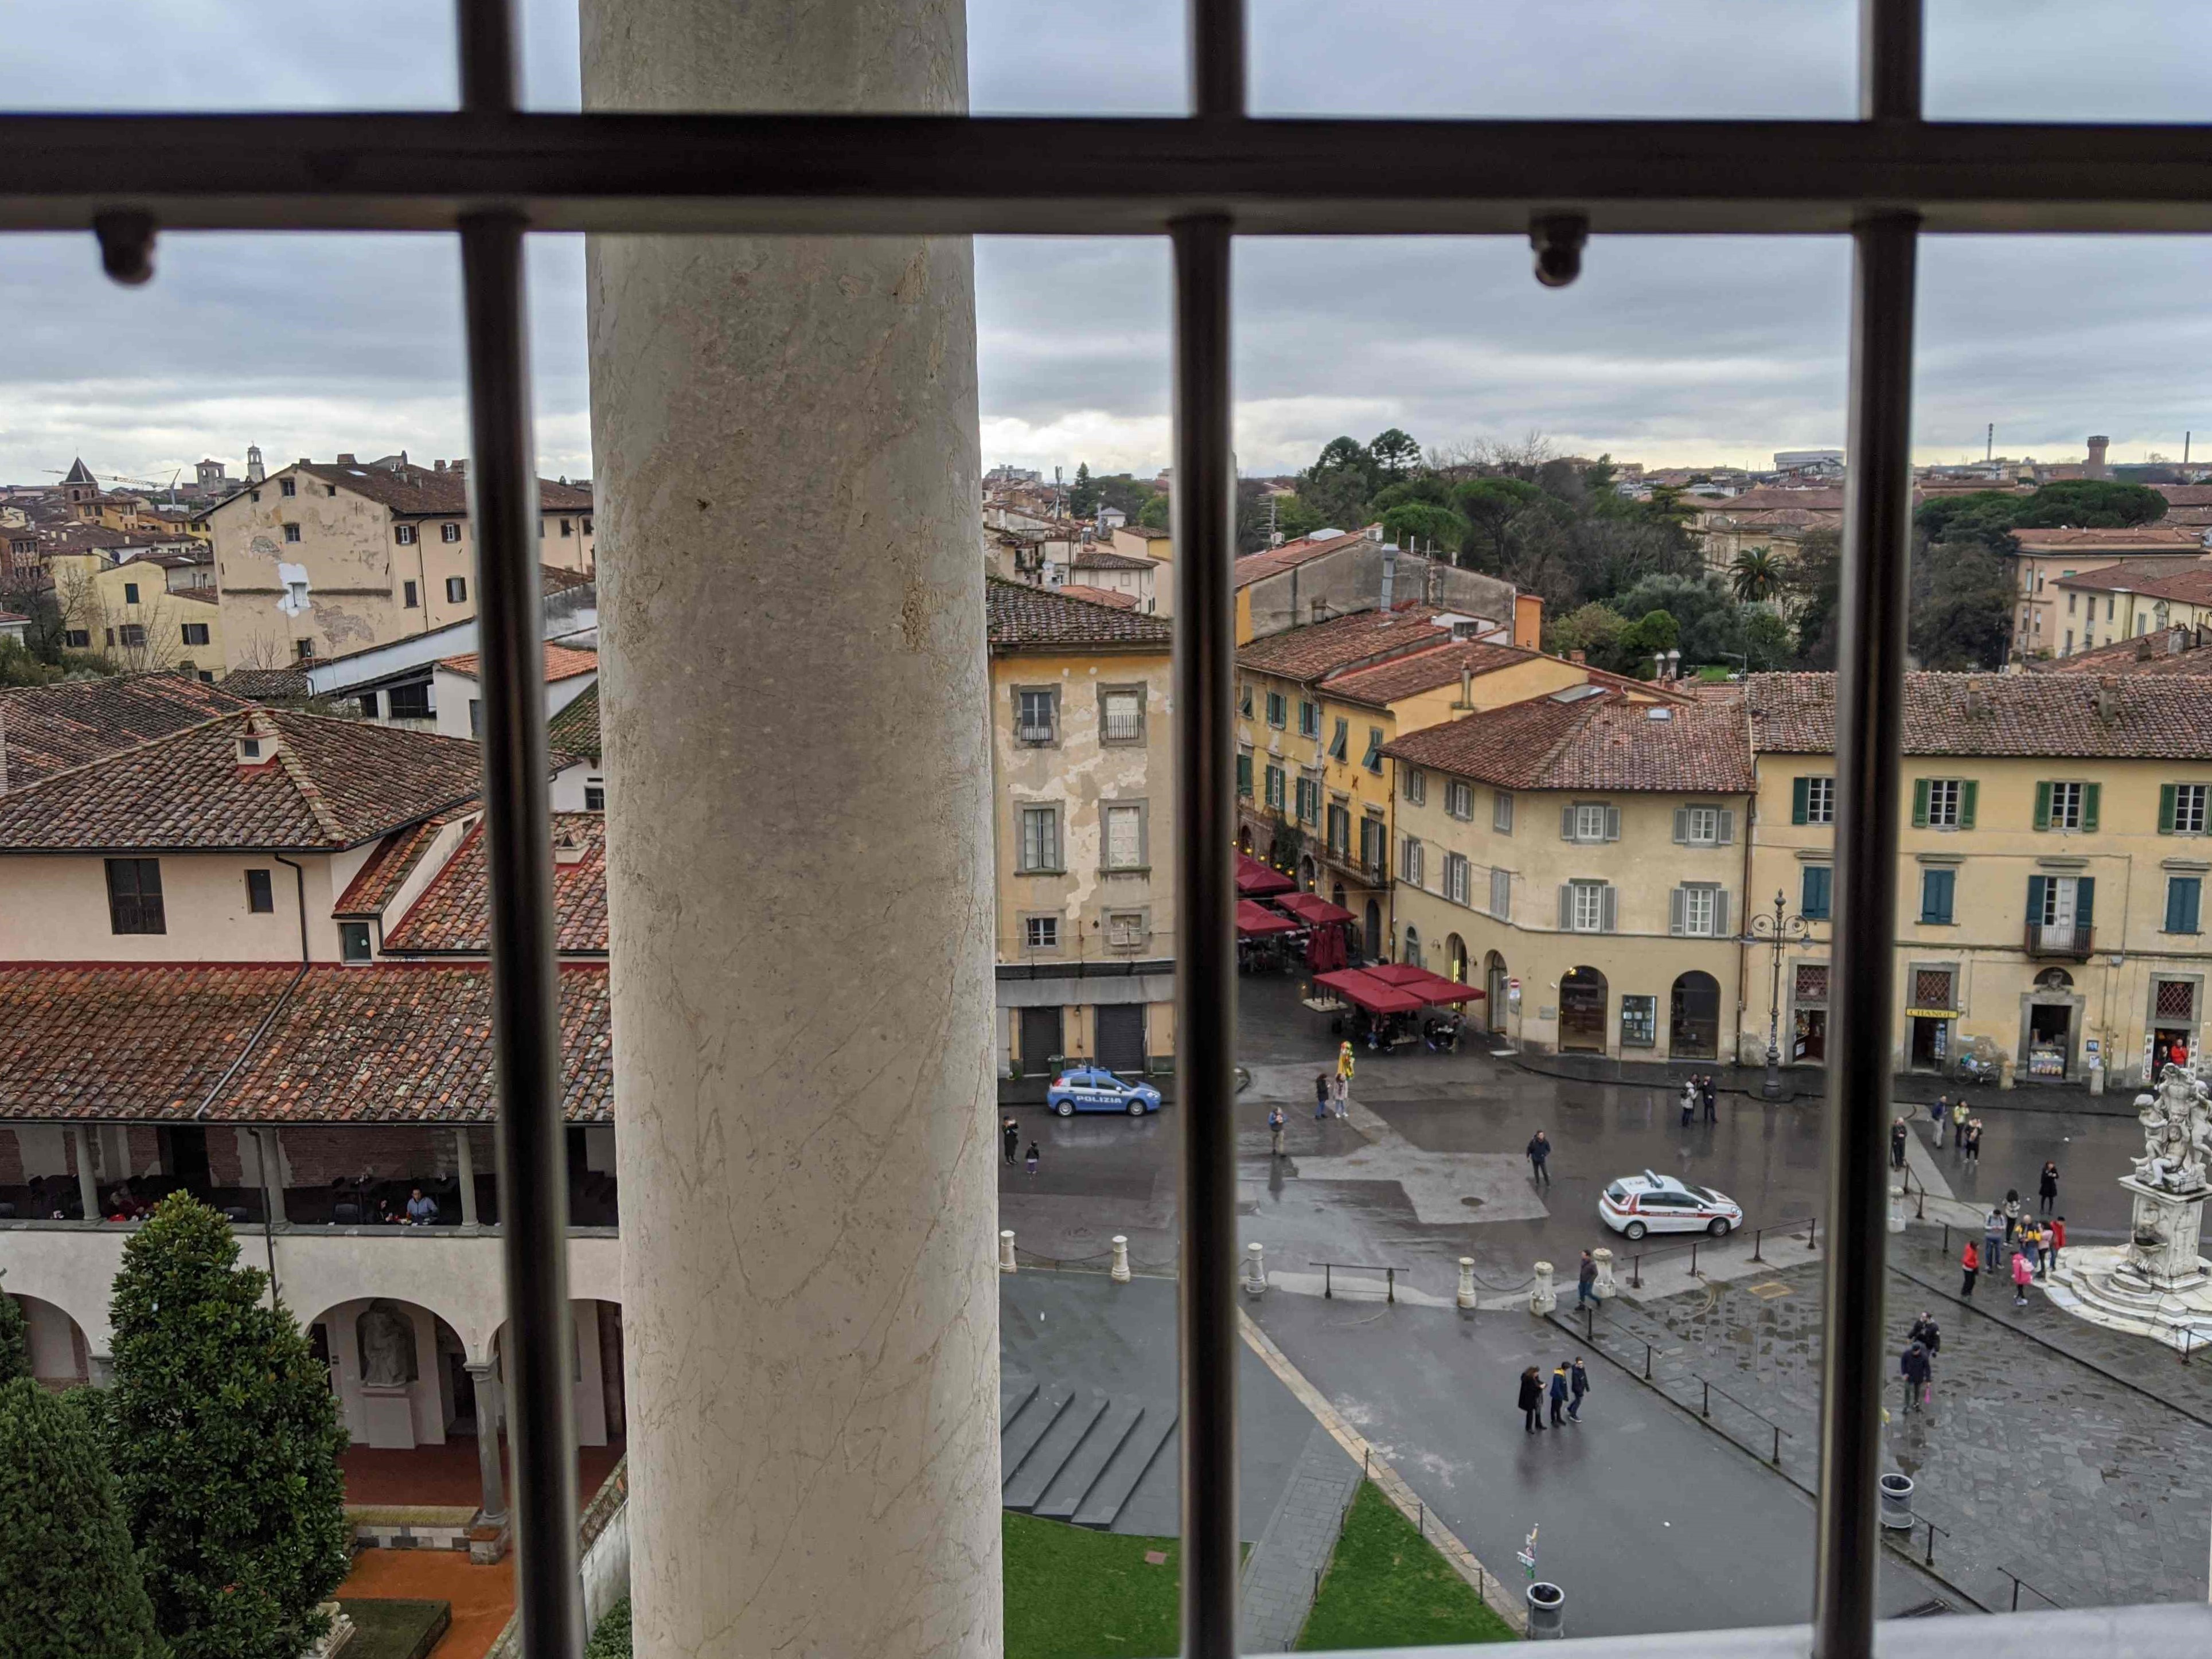 Leaning Tower of Pisa window view